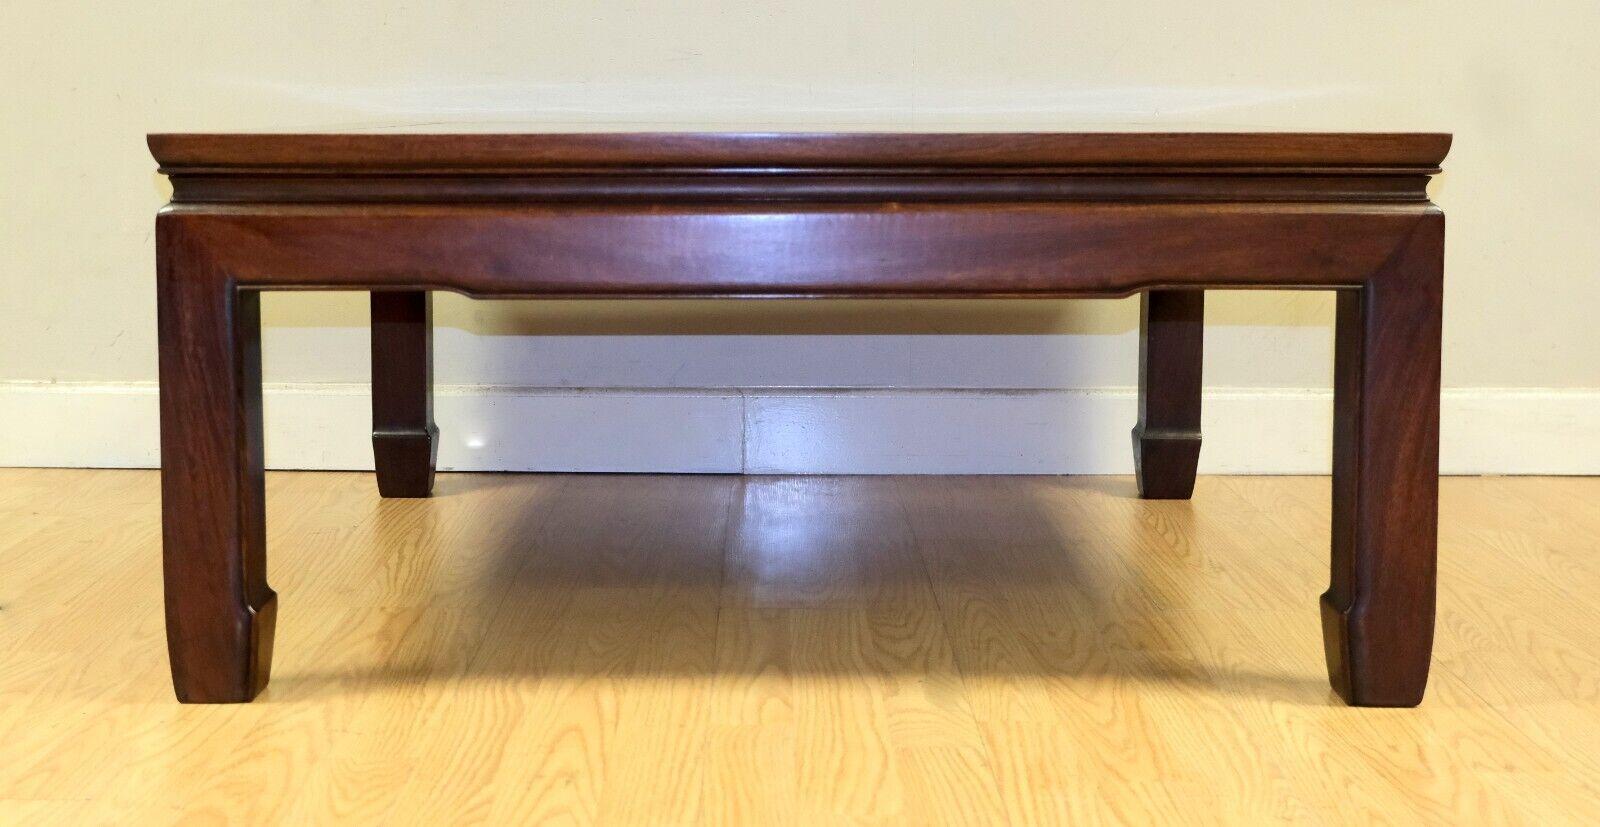 We are delighted to offer for sale this charming Rosewood Ming style Chinese coffee table. 

This well made table features hoof feet and a natural colour that make it easy to combine in any room.  This table is simple yet stunning from any point of